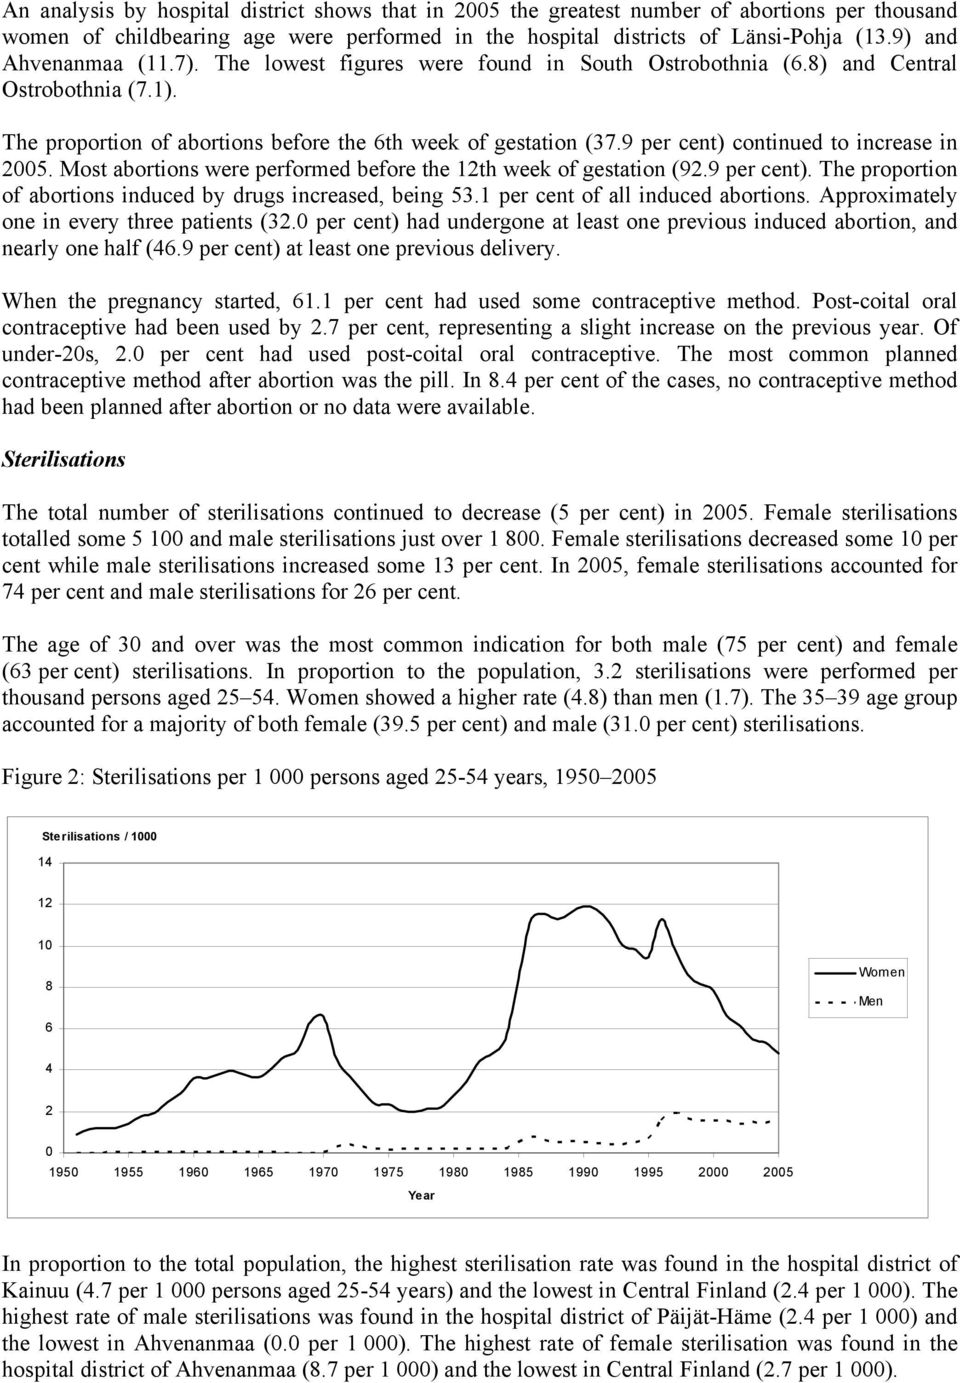 9 per cent) continued to increase in 2005. Most abortions were performed before the 12th week of gestation (92.9 per cent). The proportion of abortions induced by drugs increased, being 53.